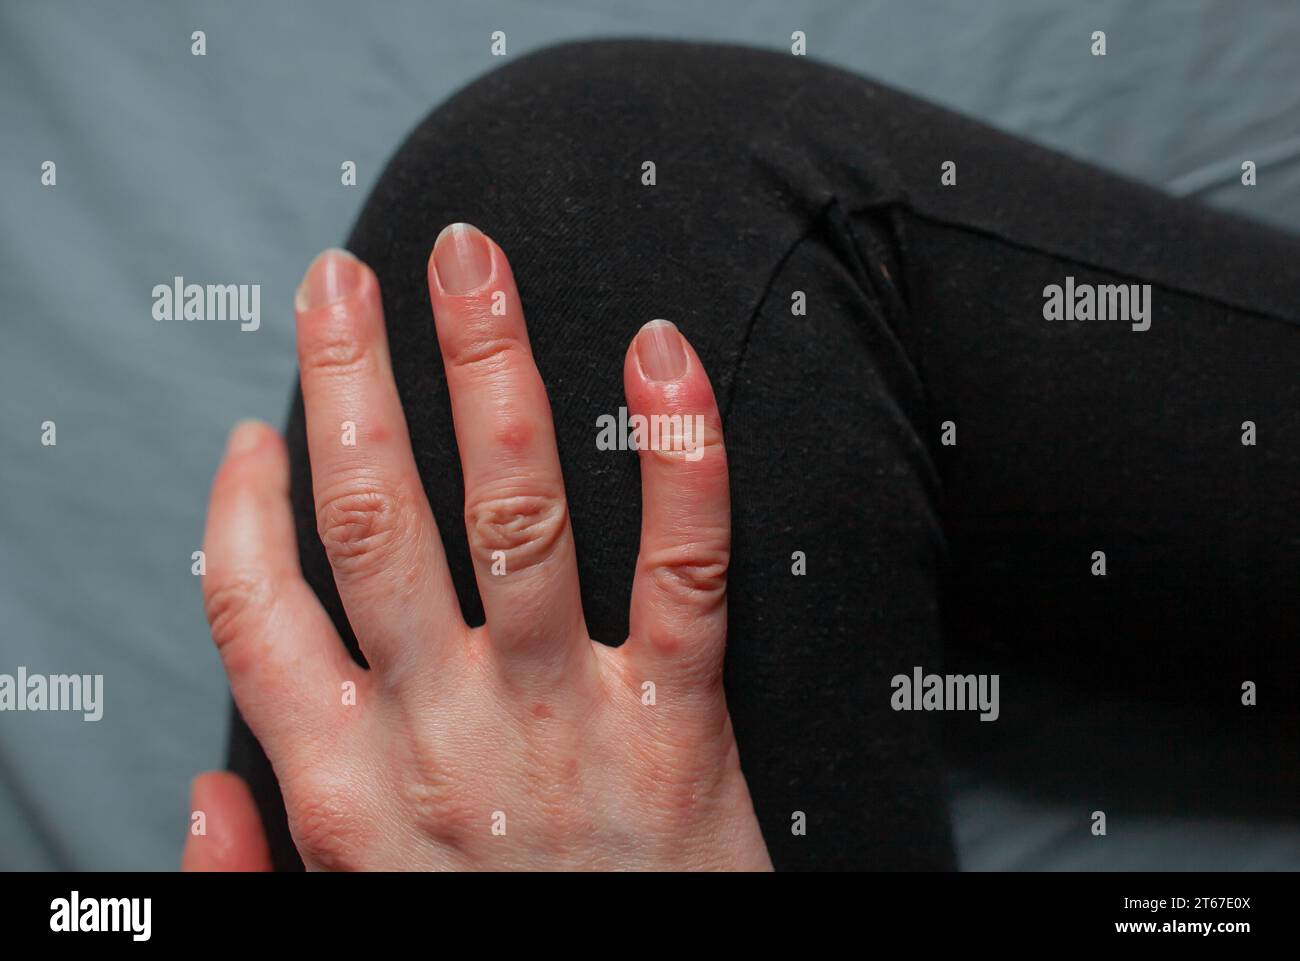 Close up photo of chilblains on fingers Hand of person with Raynaud's phenomenon and chilblains lesions on fingers Perniosis Red swollen fingers Stock Photo